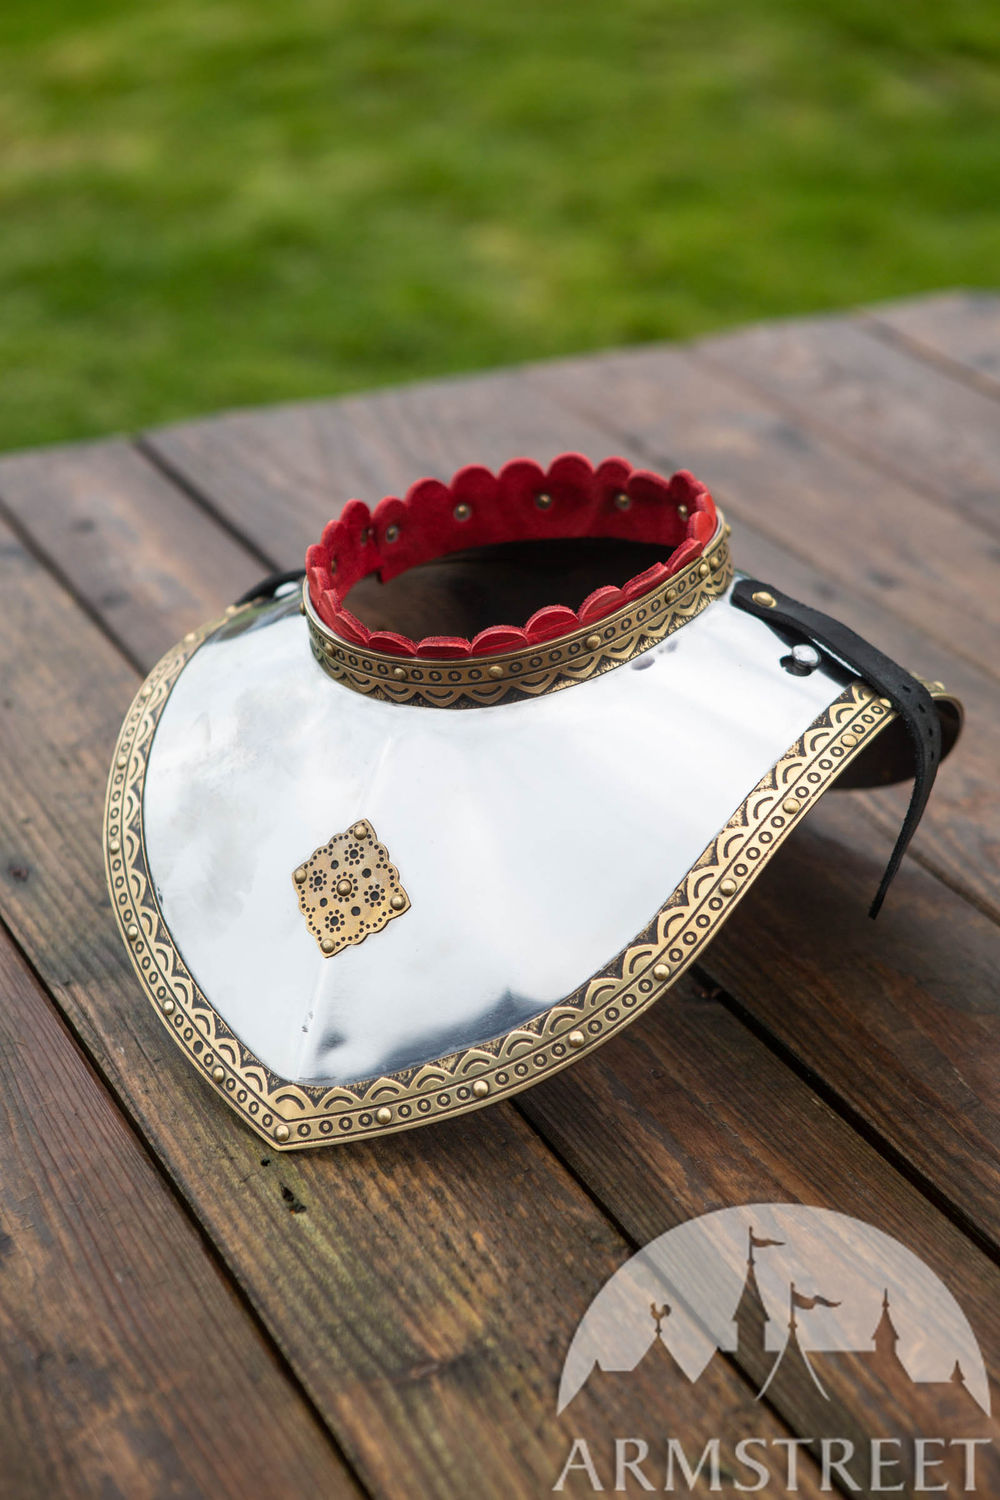 Polish Hussar gorget with brass accents